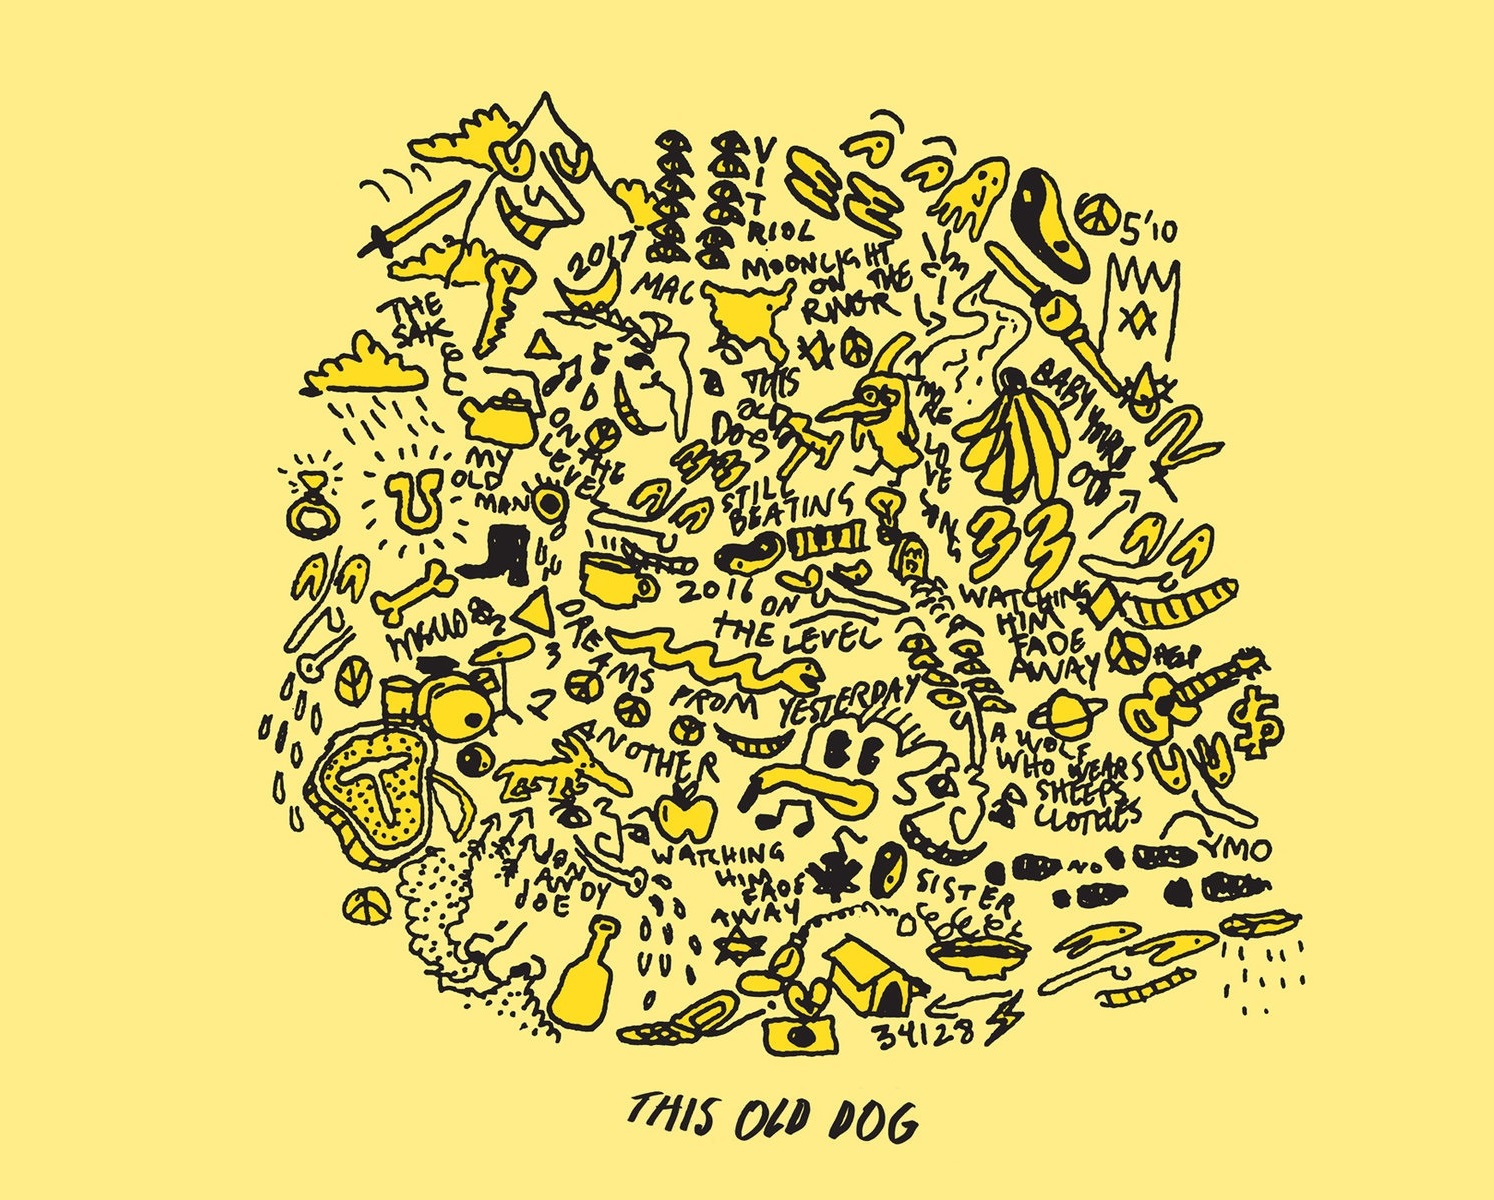 mac demarco this old dog on demo